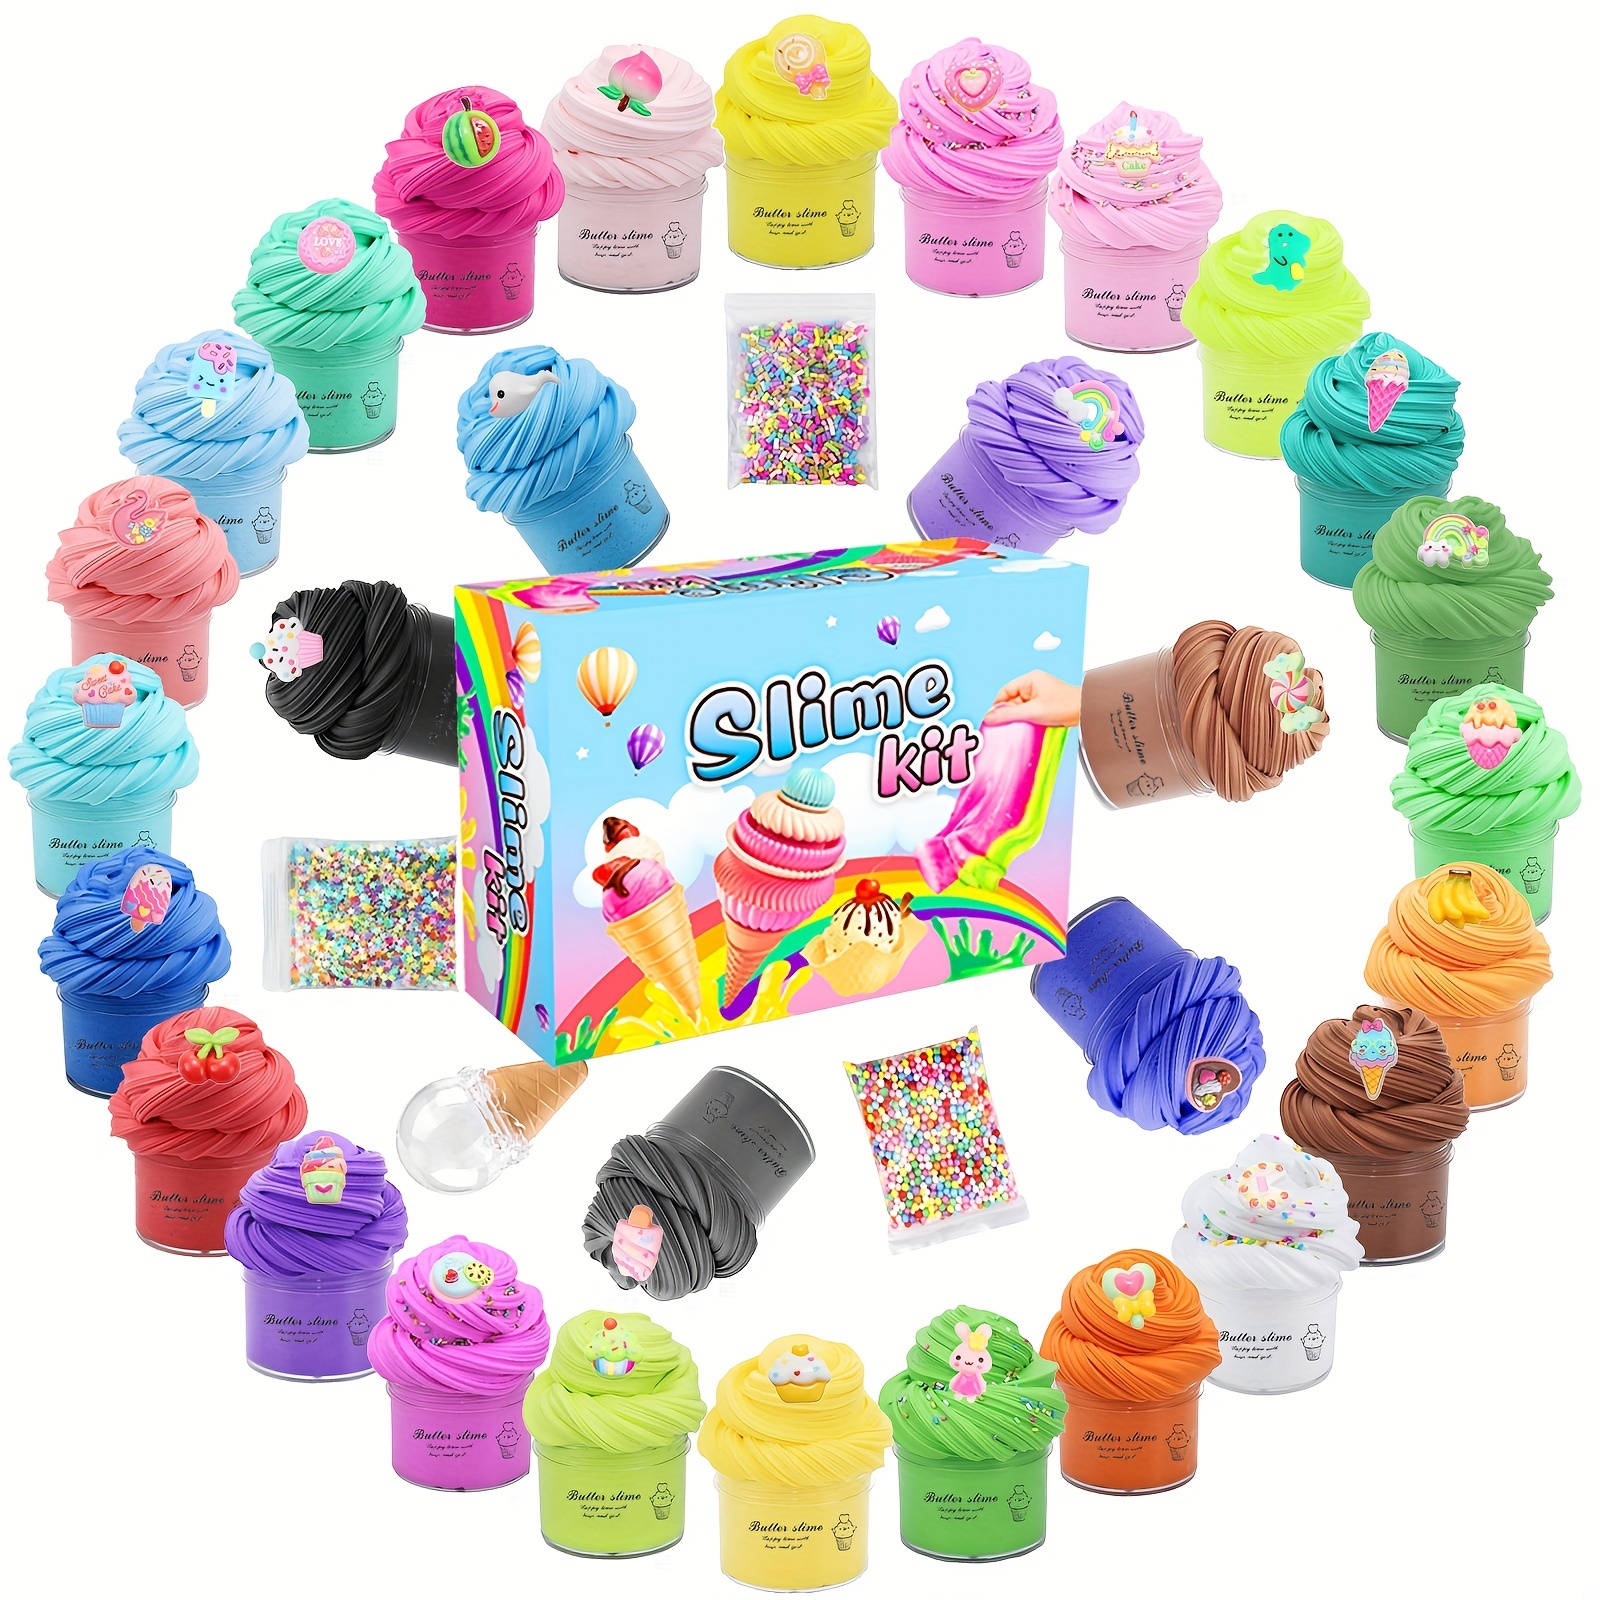 Toy Slime